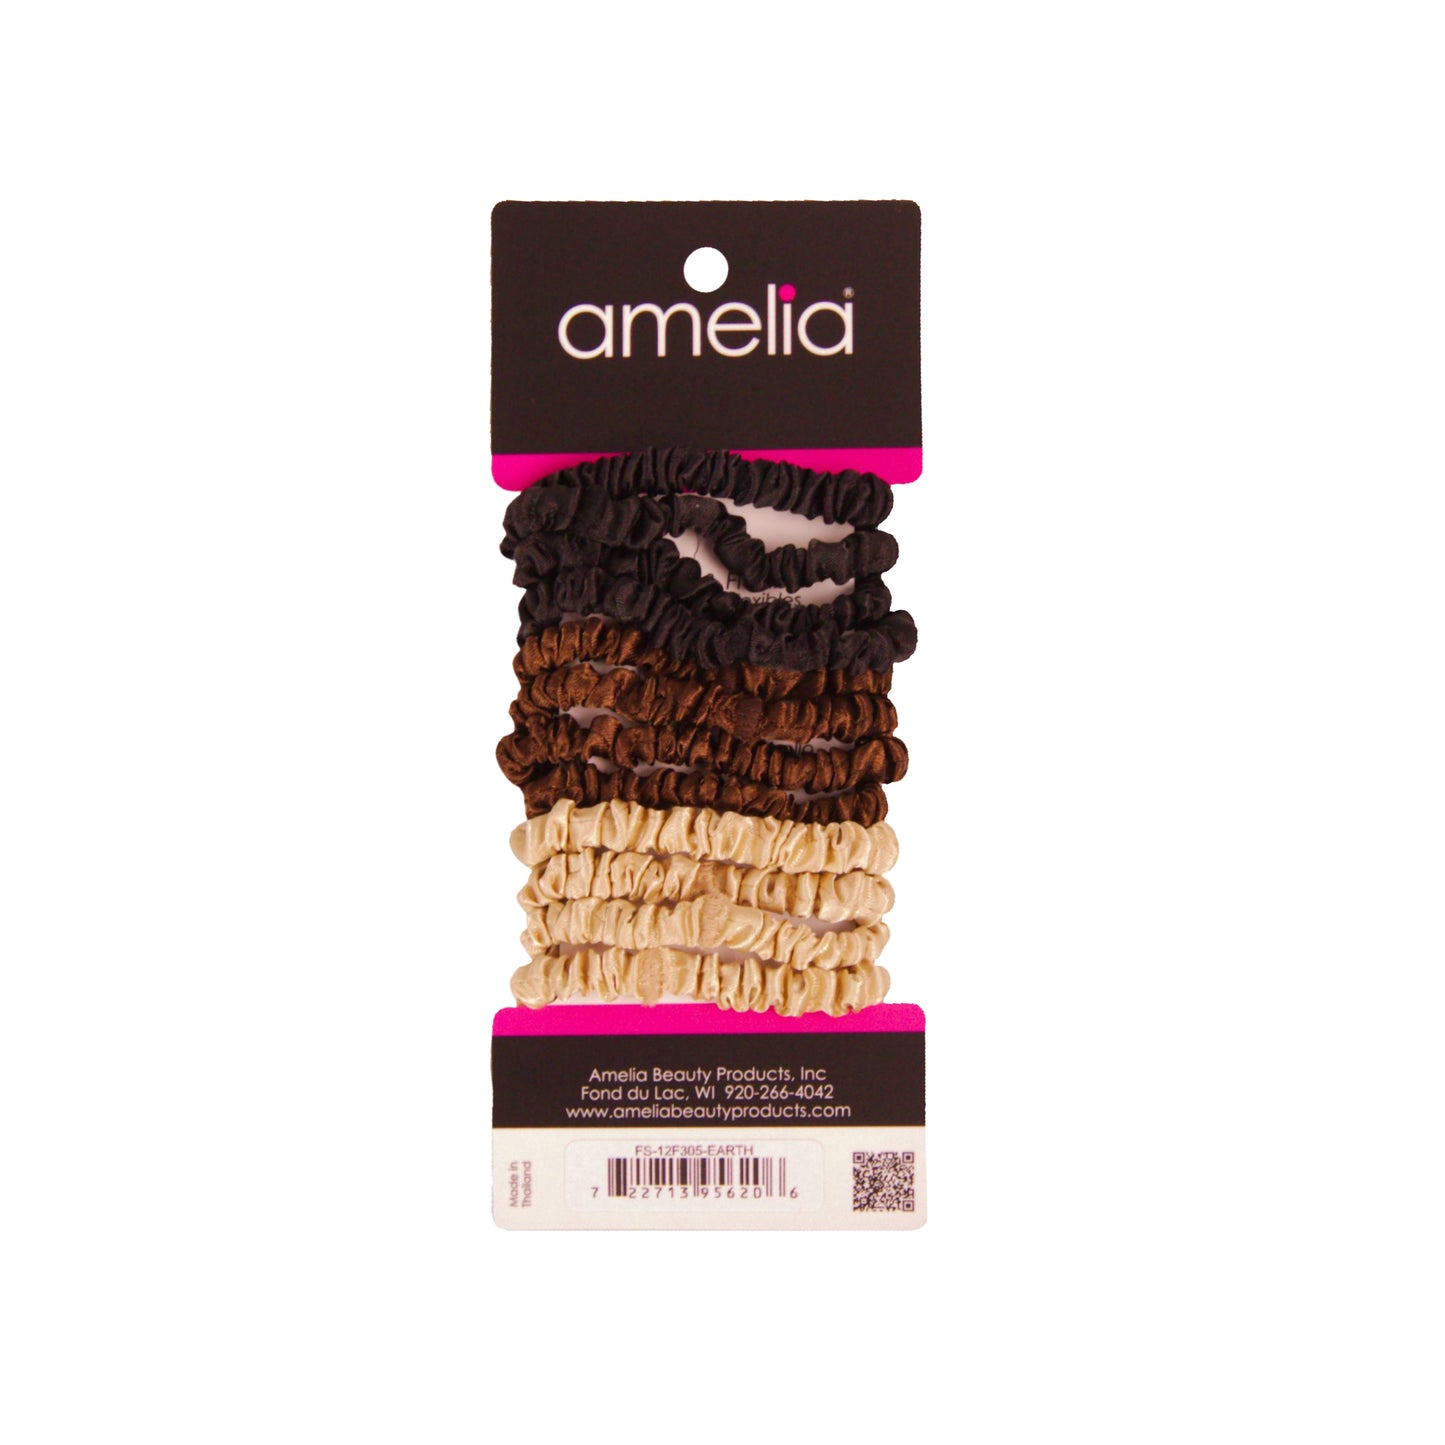 Amelia Beauty, Earth Tones Skinny Satin Scrunchies, 2in Diameter, Gentle and Strong Hold, No Snag, No Dents or Creases. 12 Pack